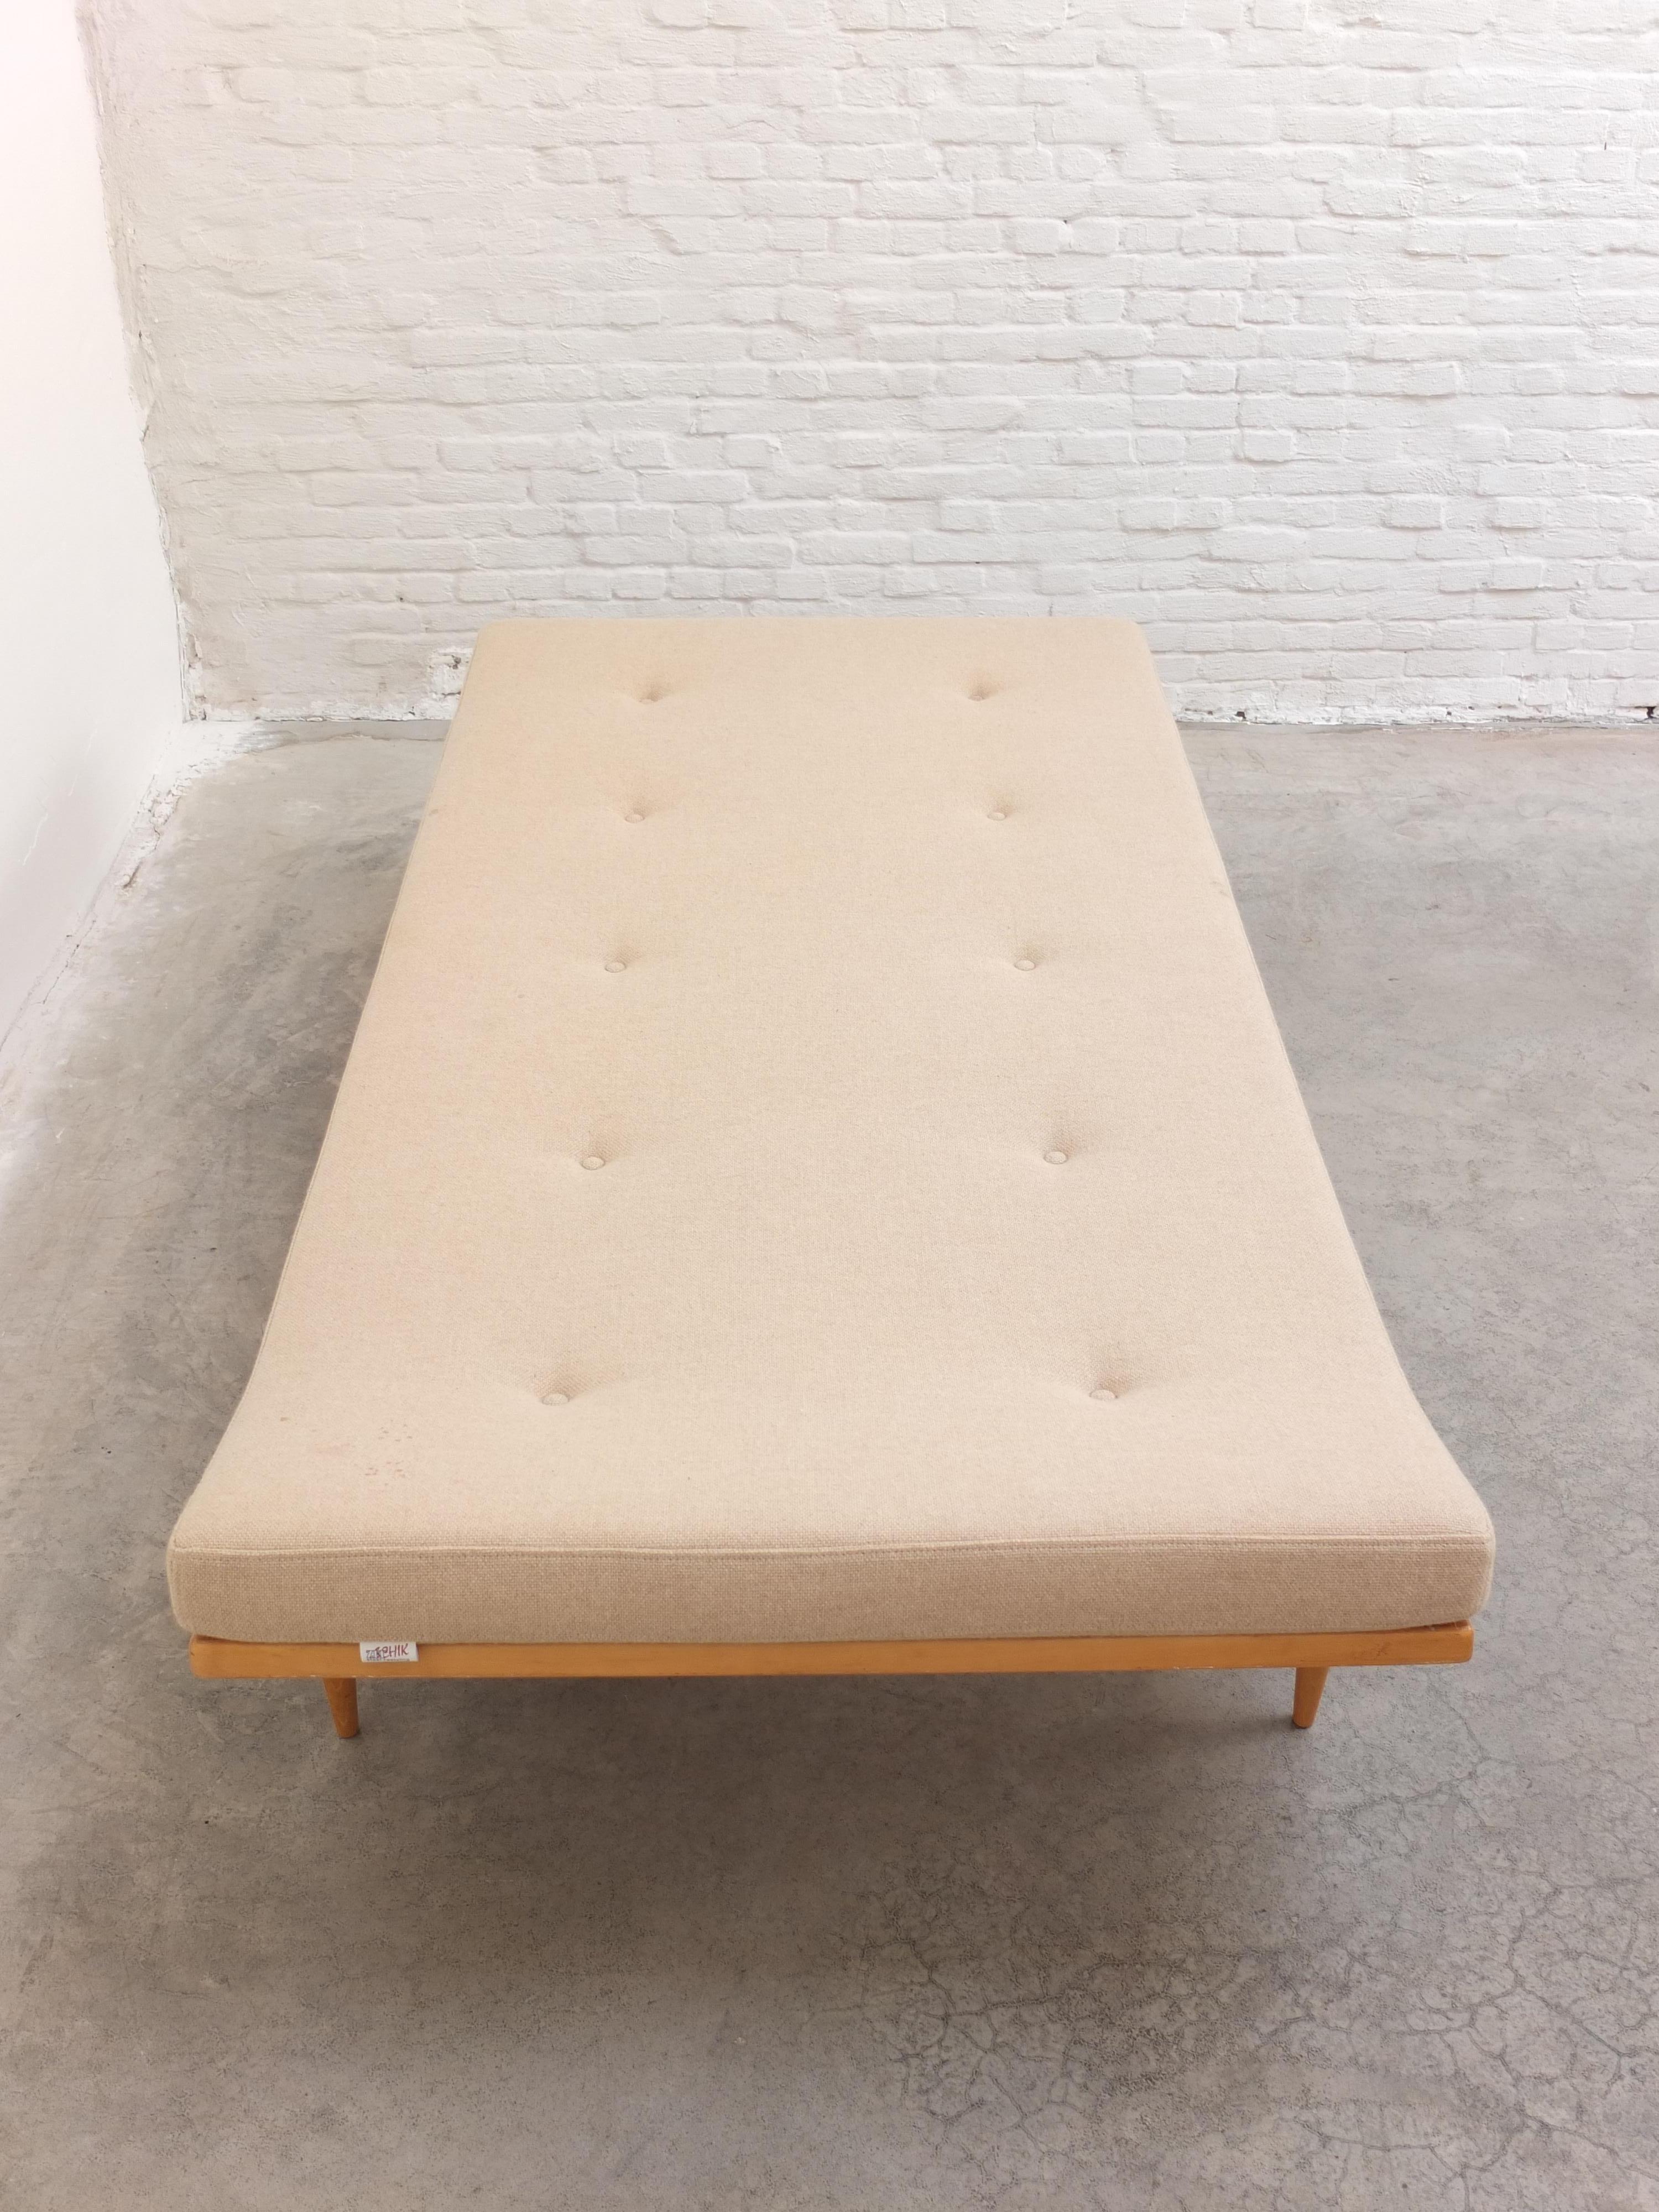 Rare 'Berlin' Daybed by Bruno Mathsson for Karl Mathsson, 1957 For Sale 7